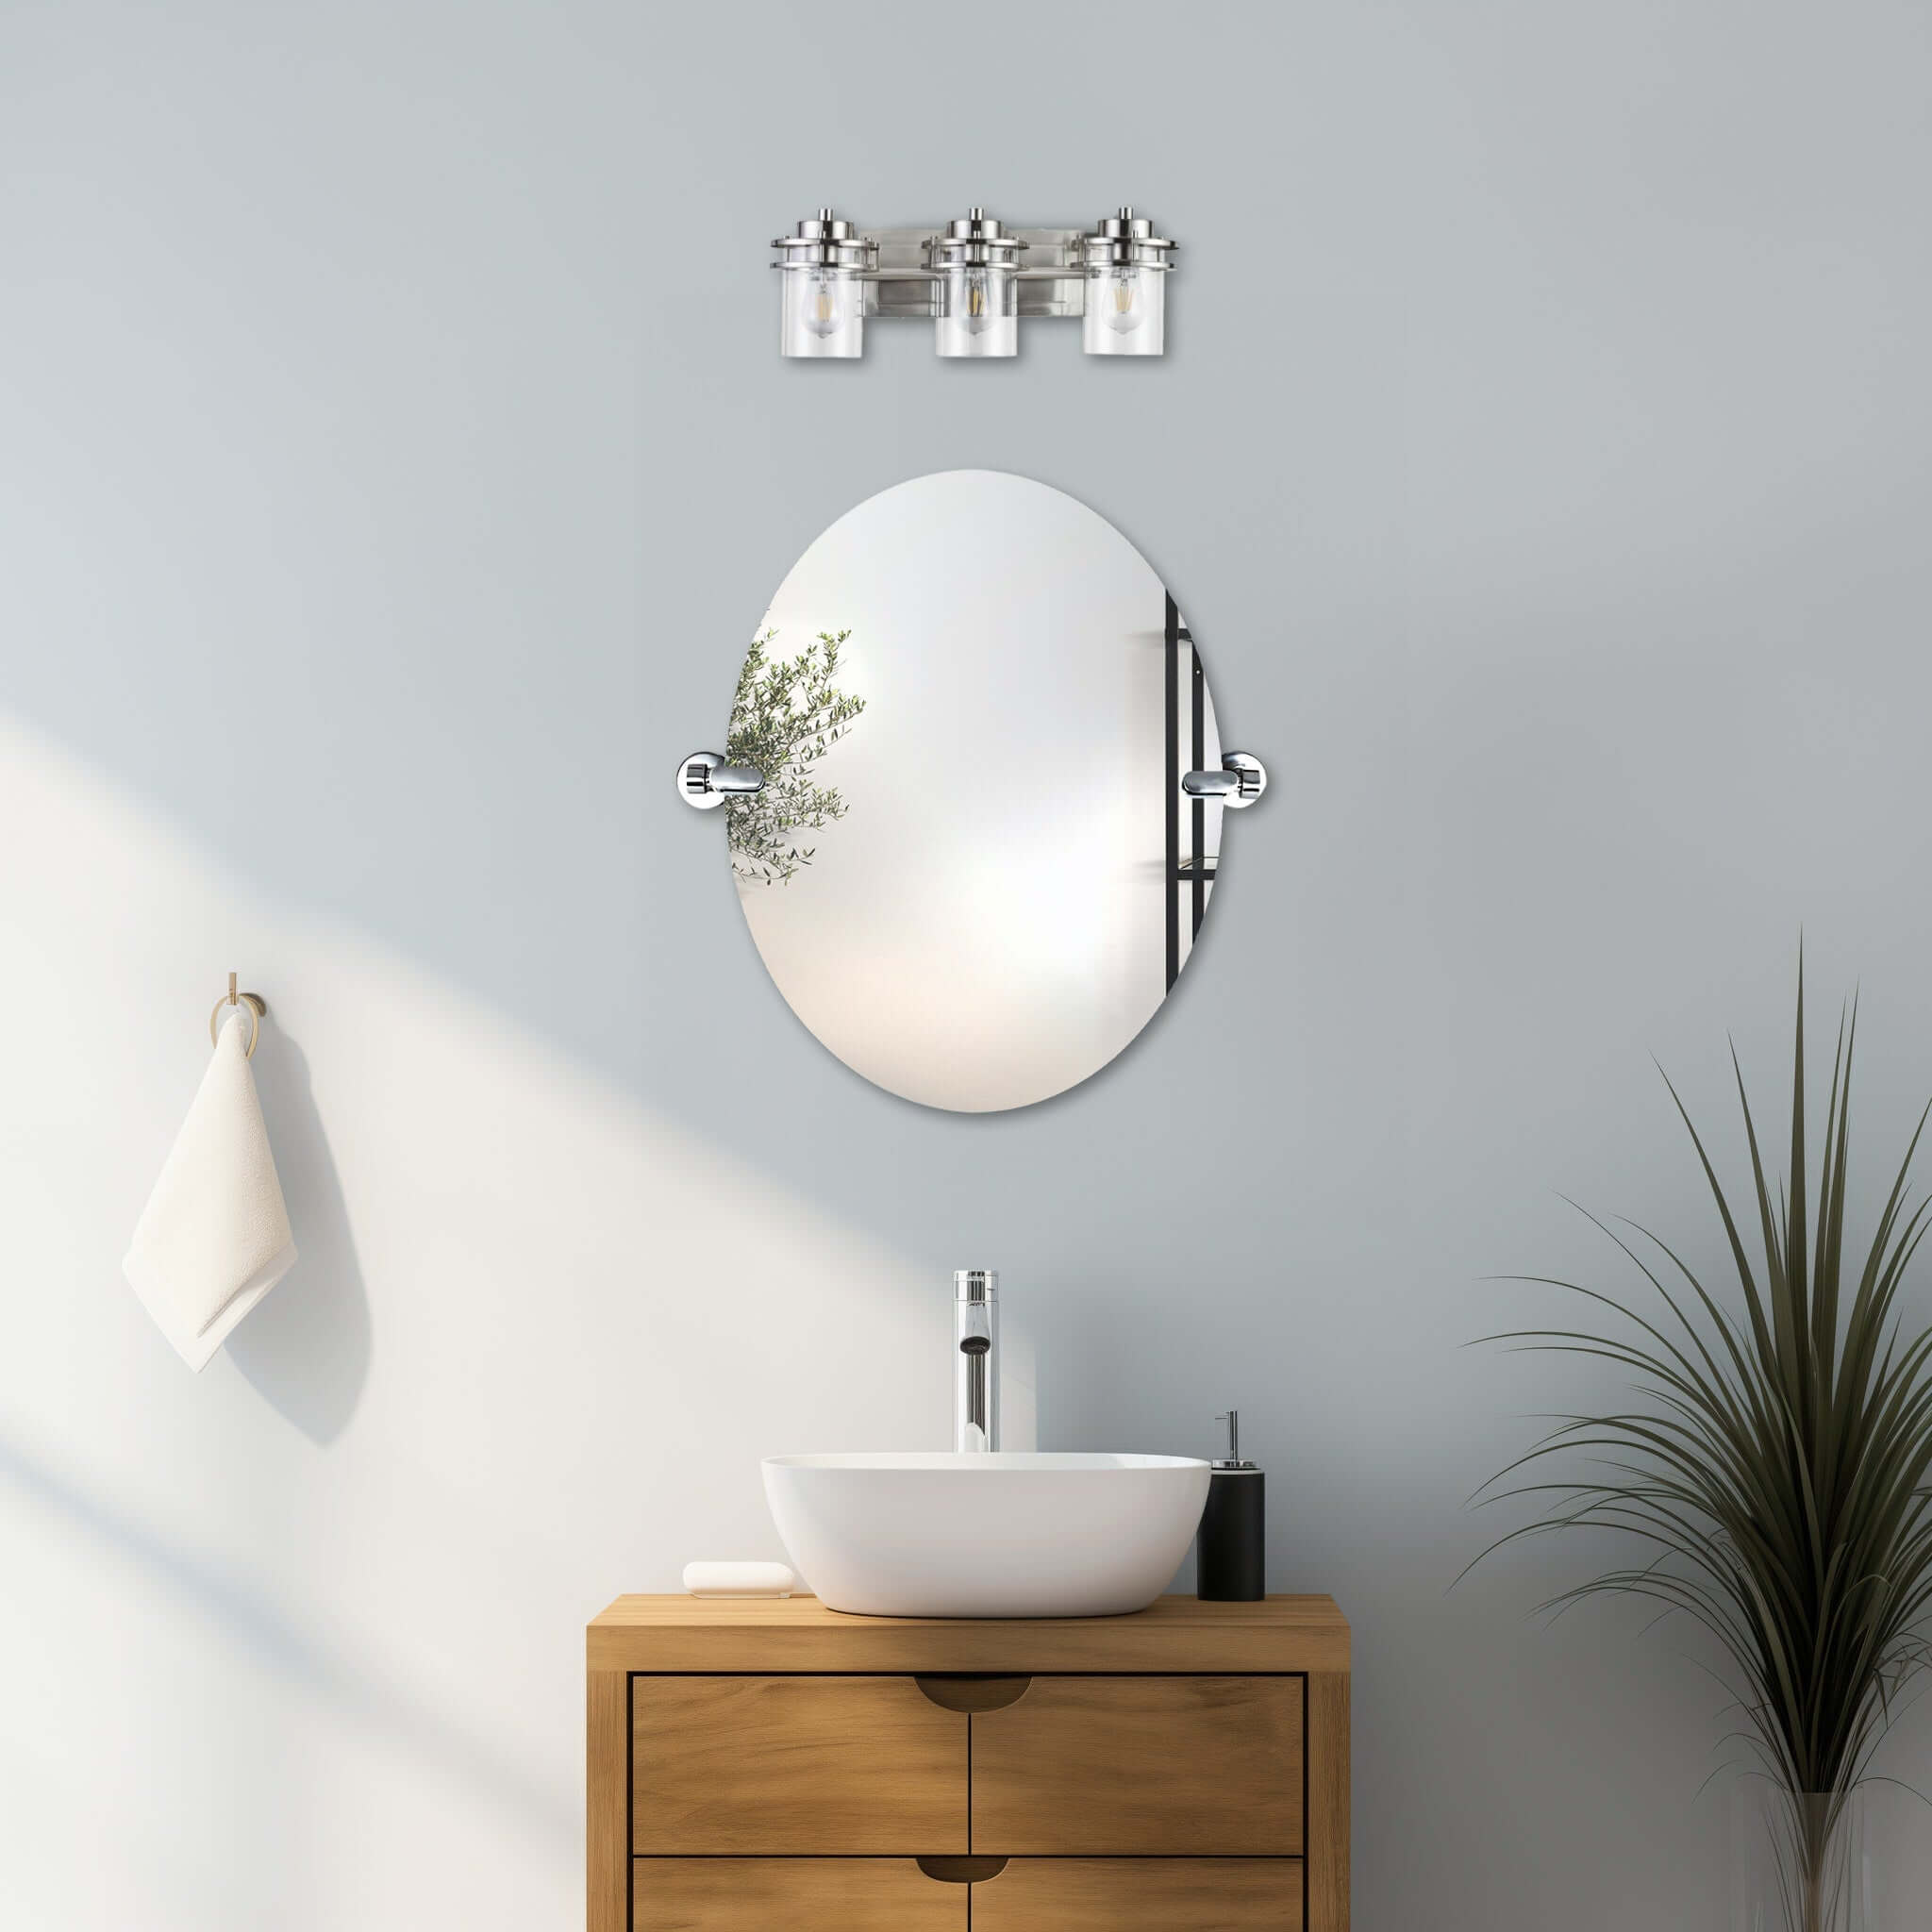 21''W x 24''H Oval Frameless Bathroom Tilting Mirror - Available in 3(Three) Colors - Dreamwerks